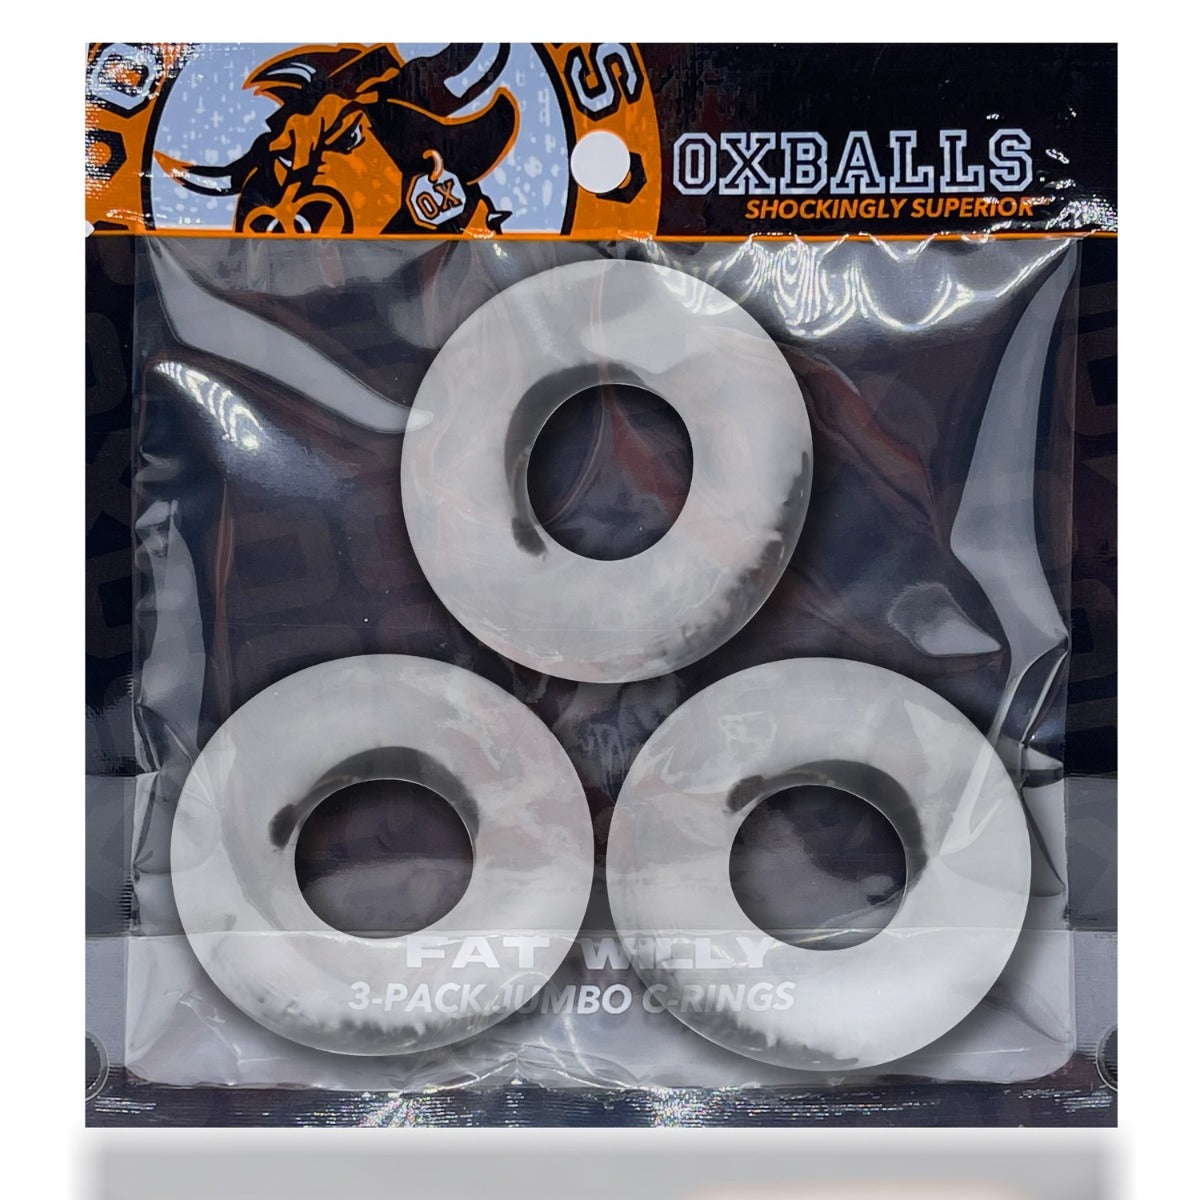 Oxballs Fat Willy Rings 3 Pack Cock Ring Clear (7565048217839)